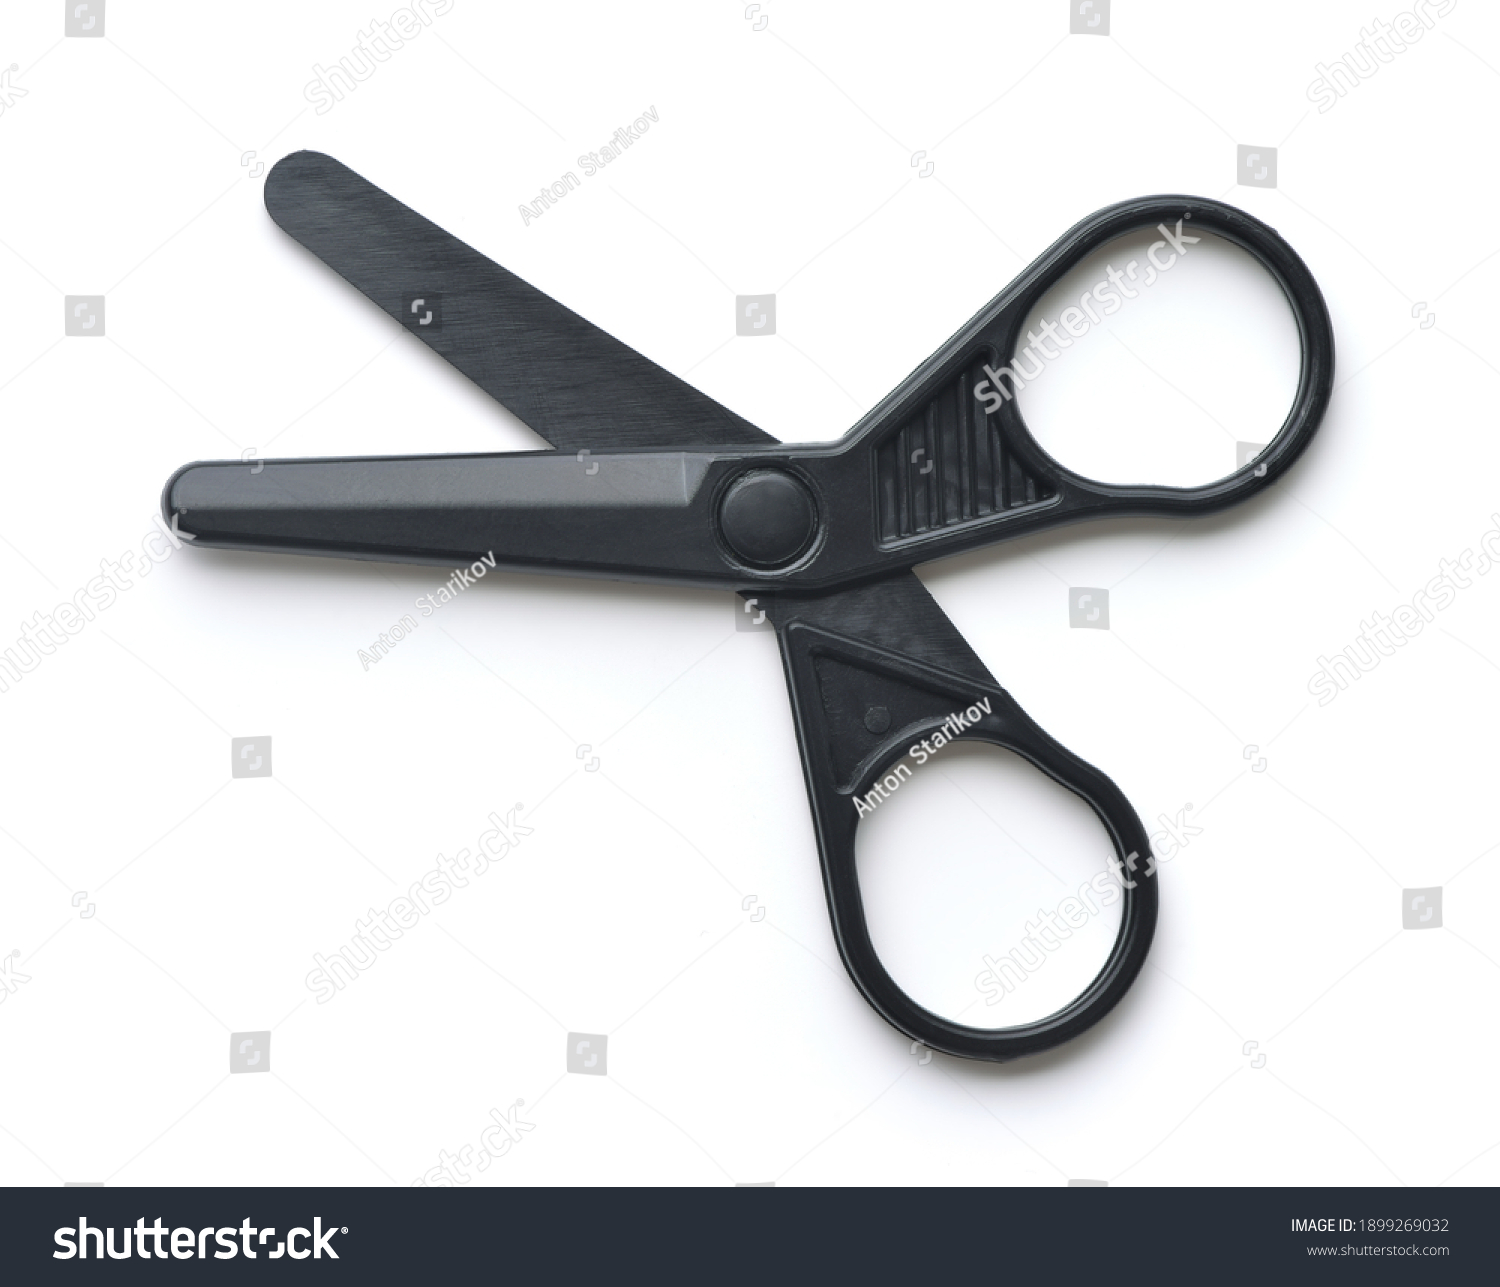 Top view of black plastic safety scissors isolated on white #1899269032